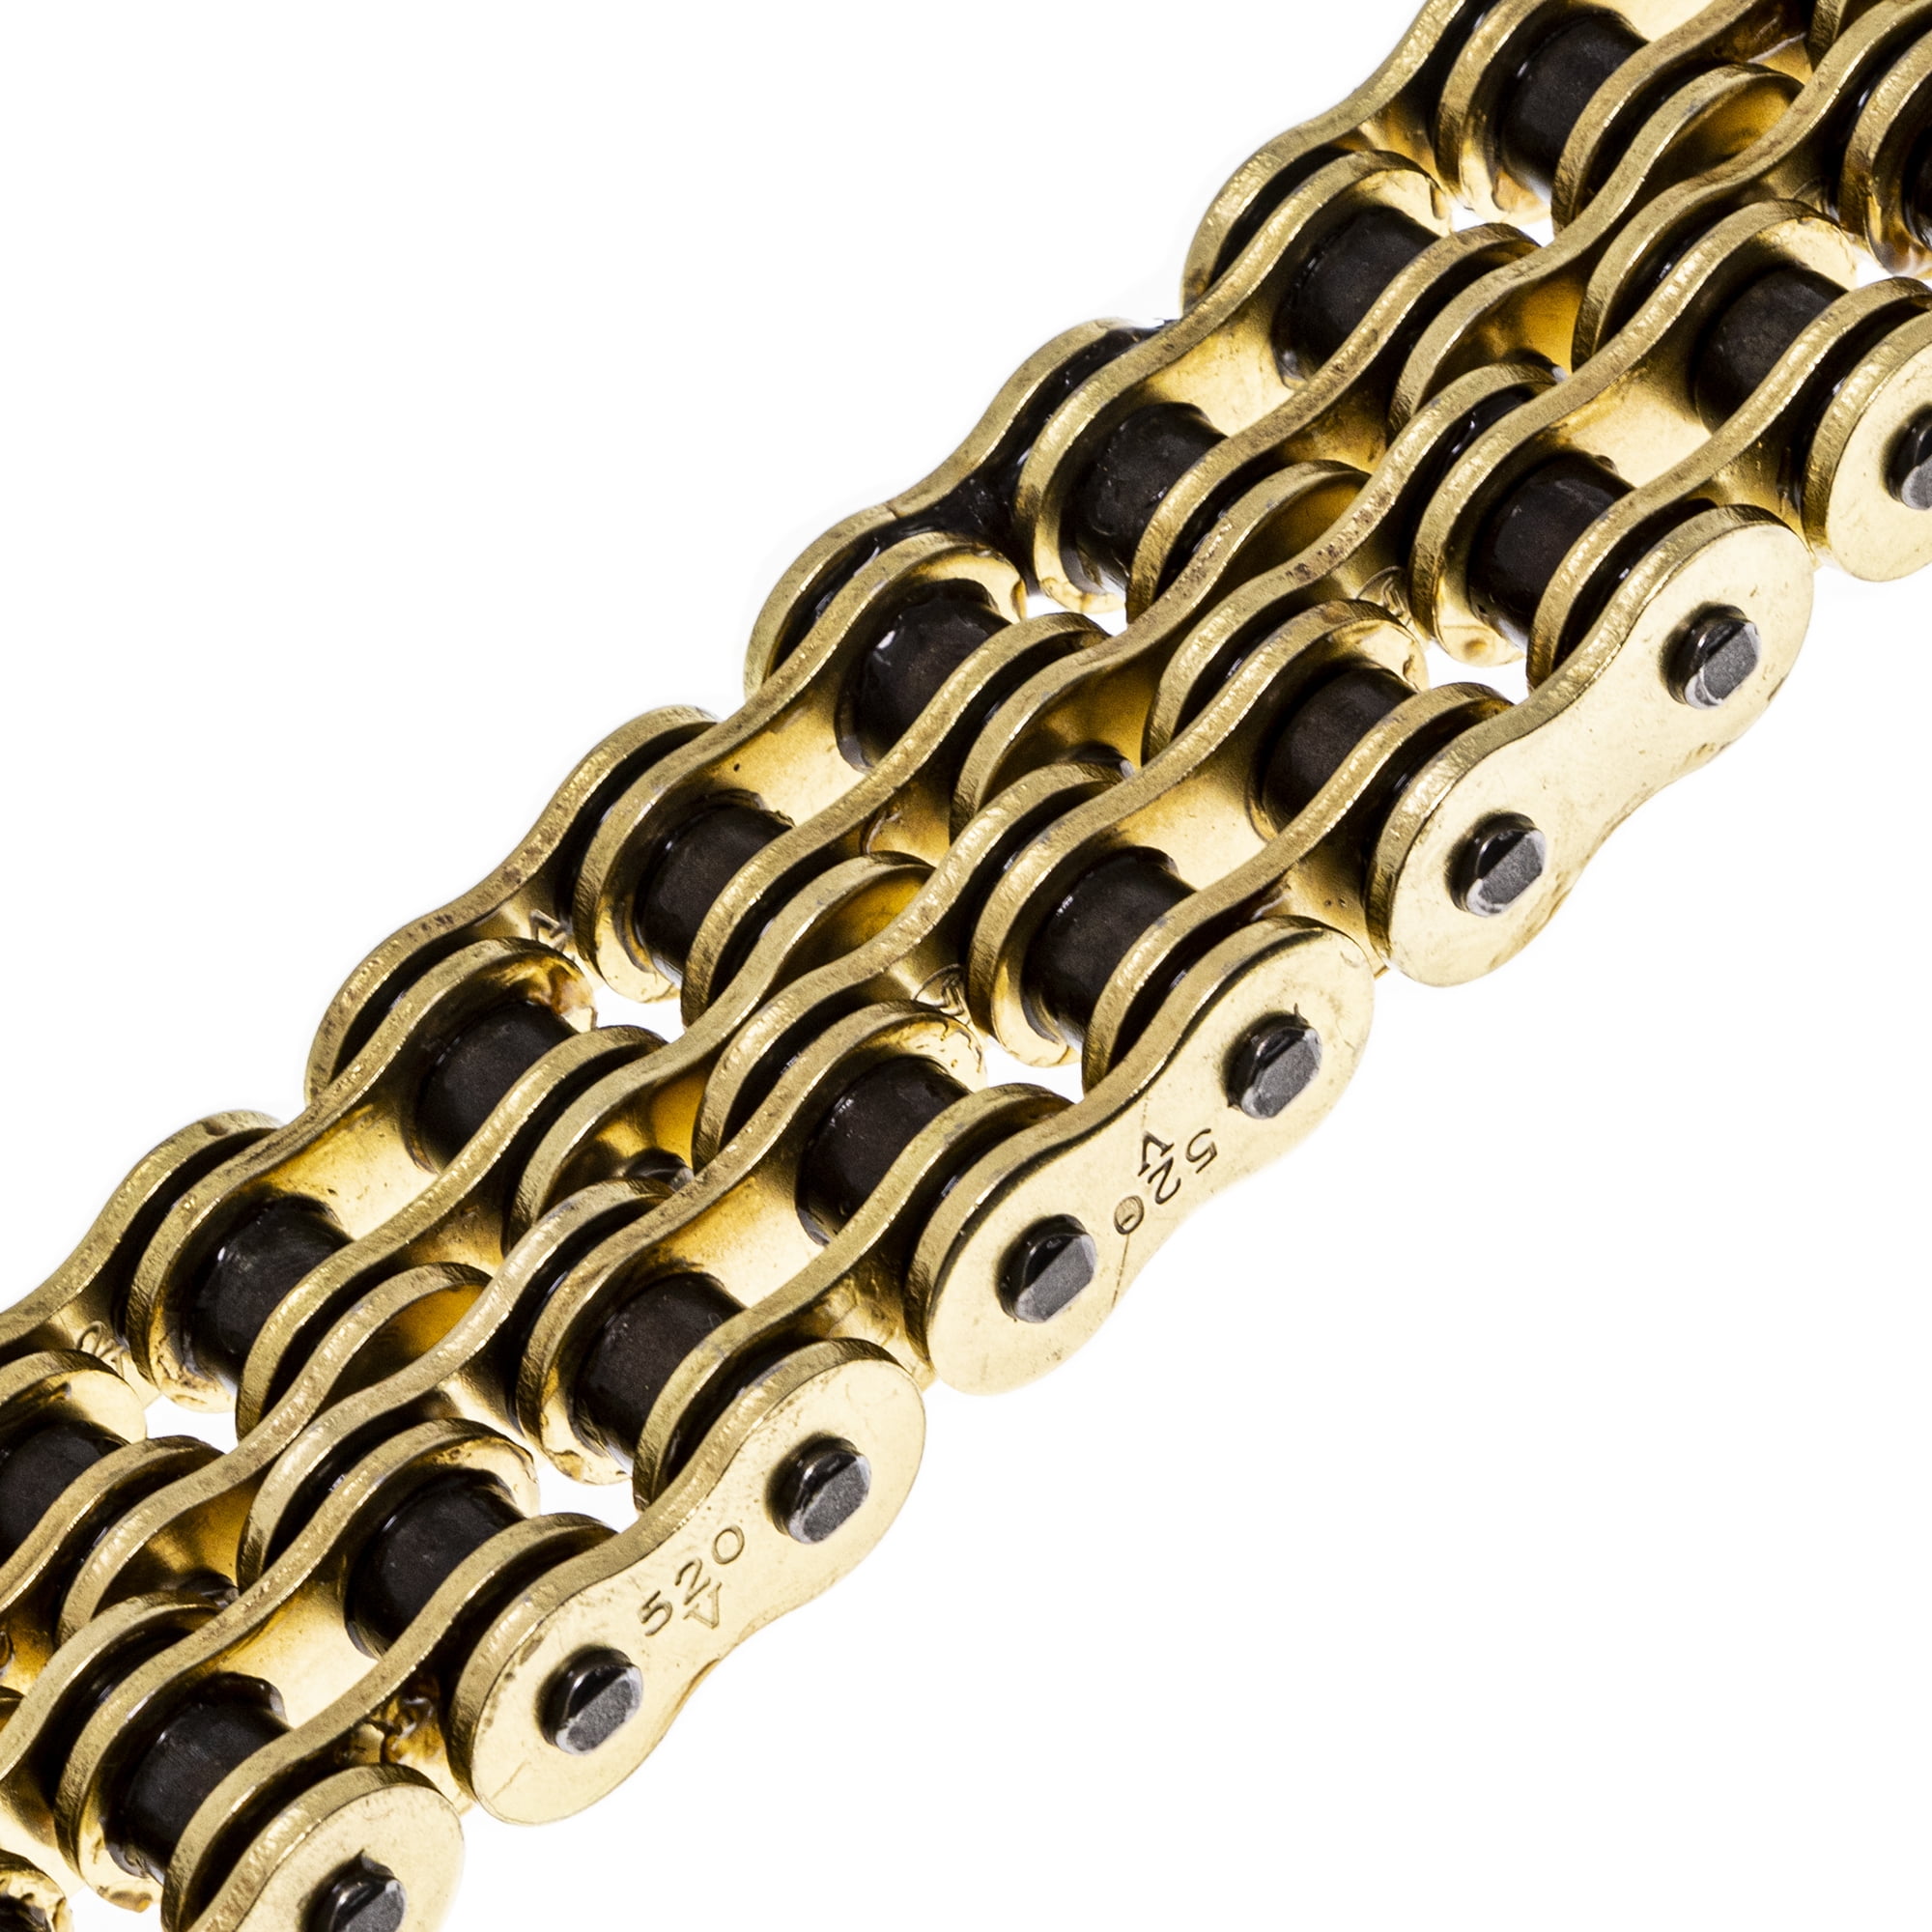 NICHE Gold 520 X-Ring Chain 116 Links With Connecting Master Link 